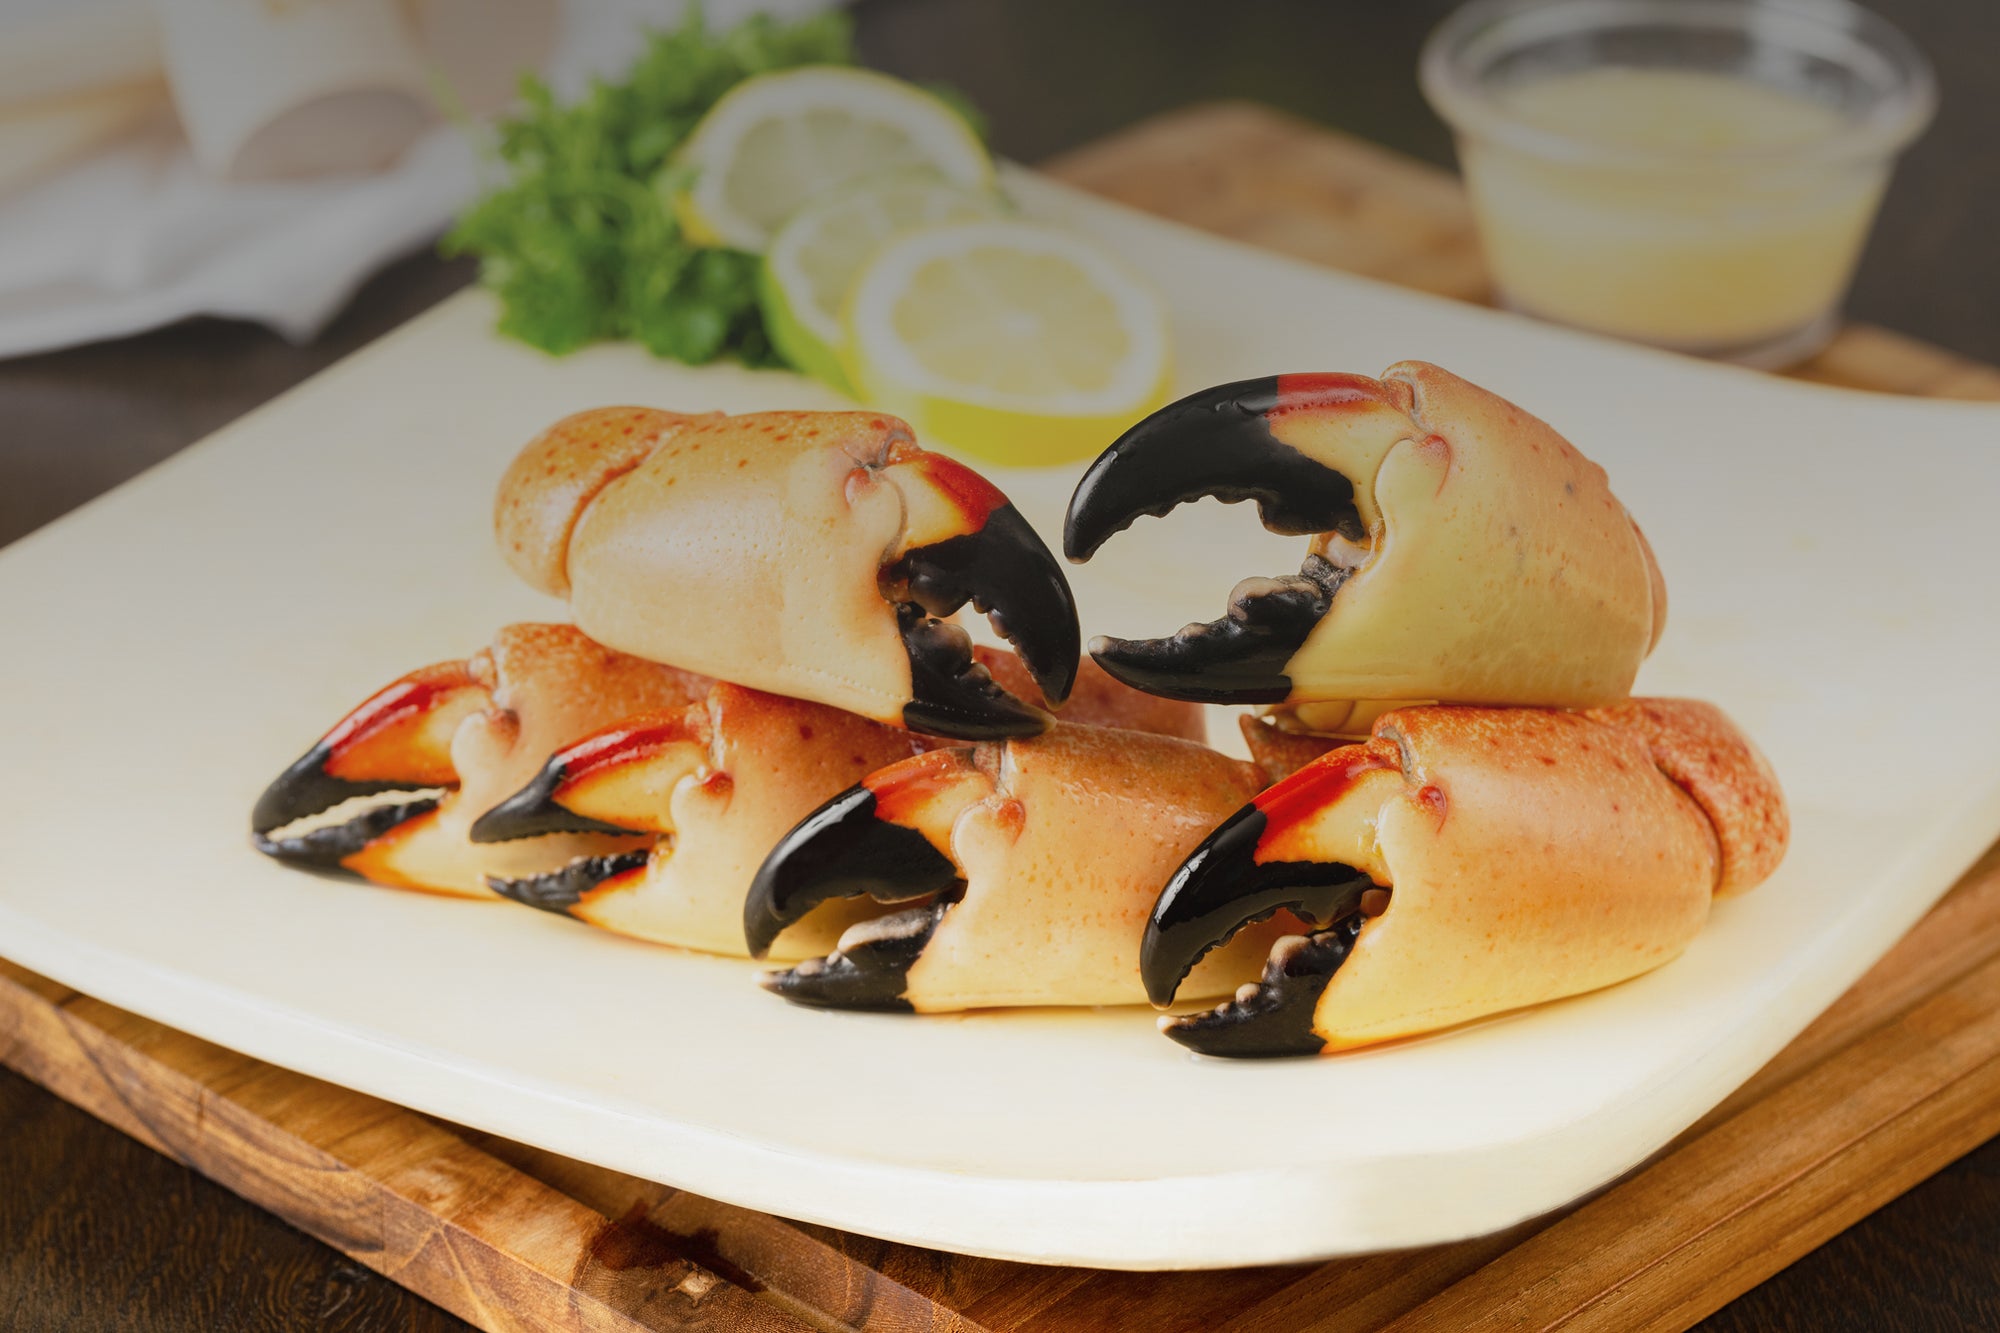 Buy Stone Crabs by the claw from Florida or order Stone Crabs Meals fresh never frozen